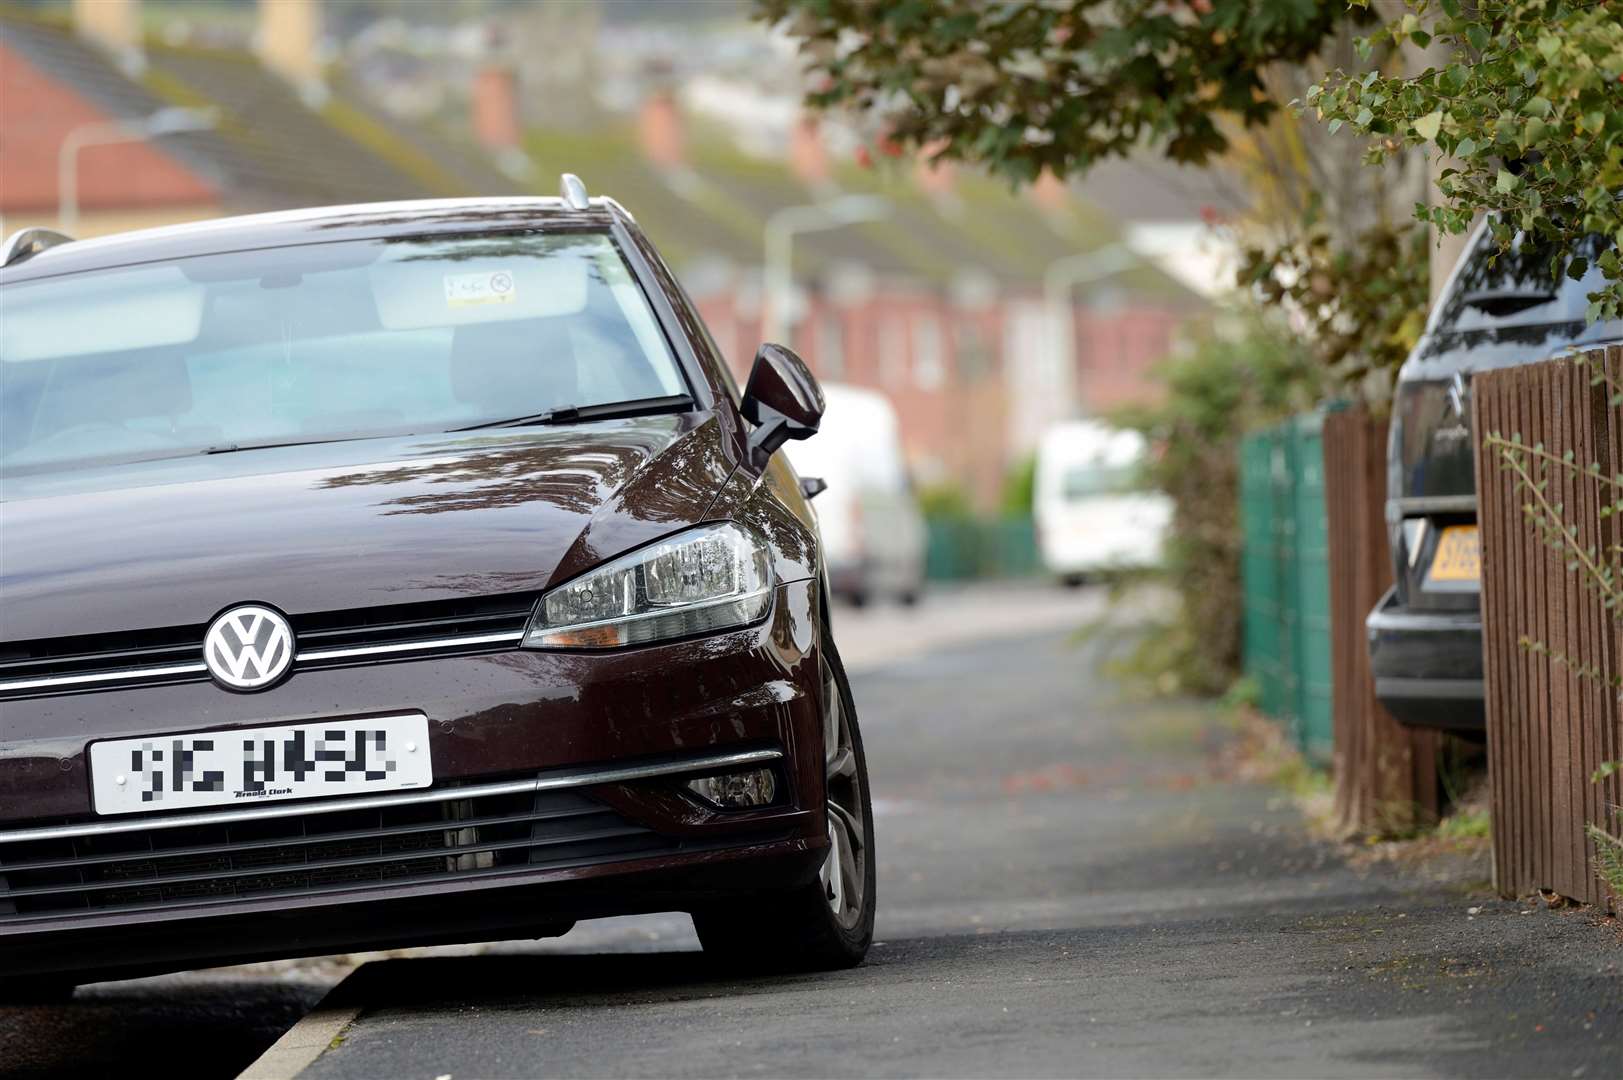 There are calls for a blanket ban on parking on pavements. Image: iStock.